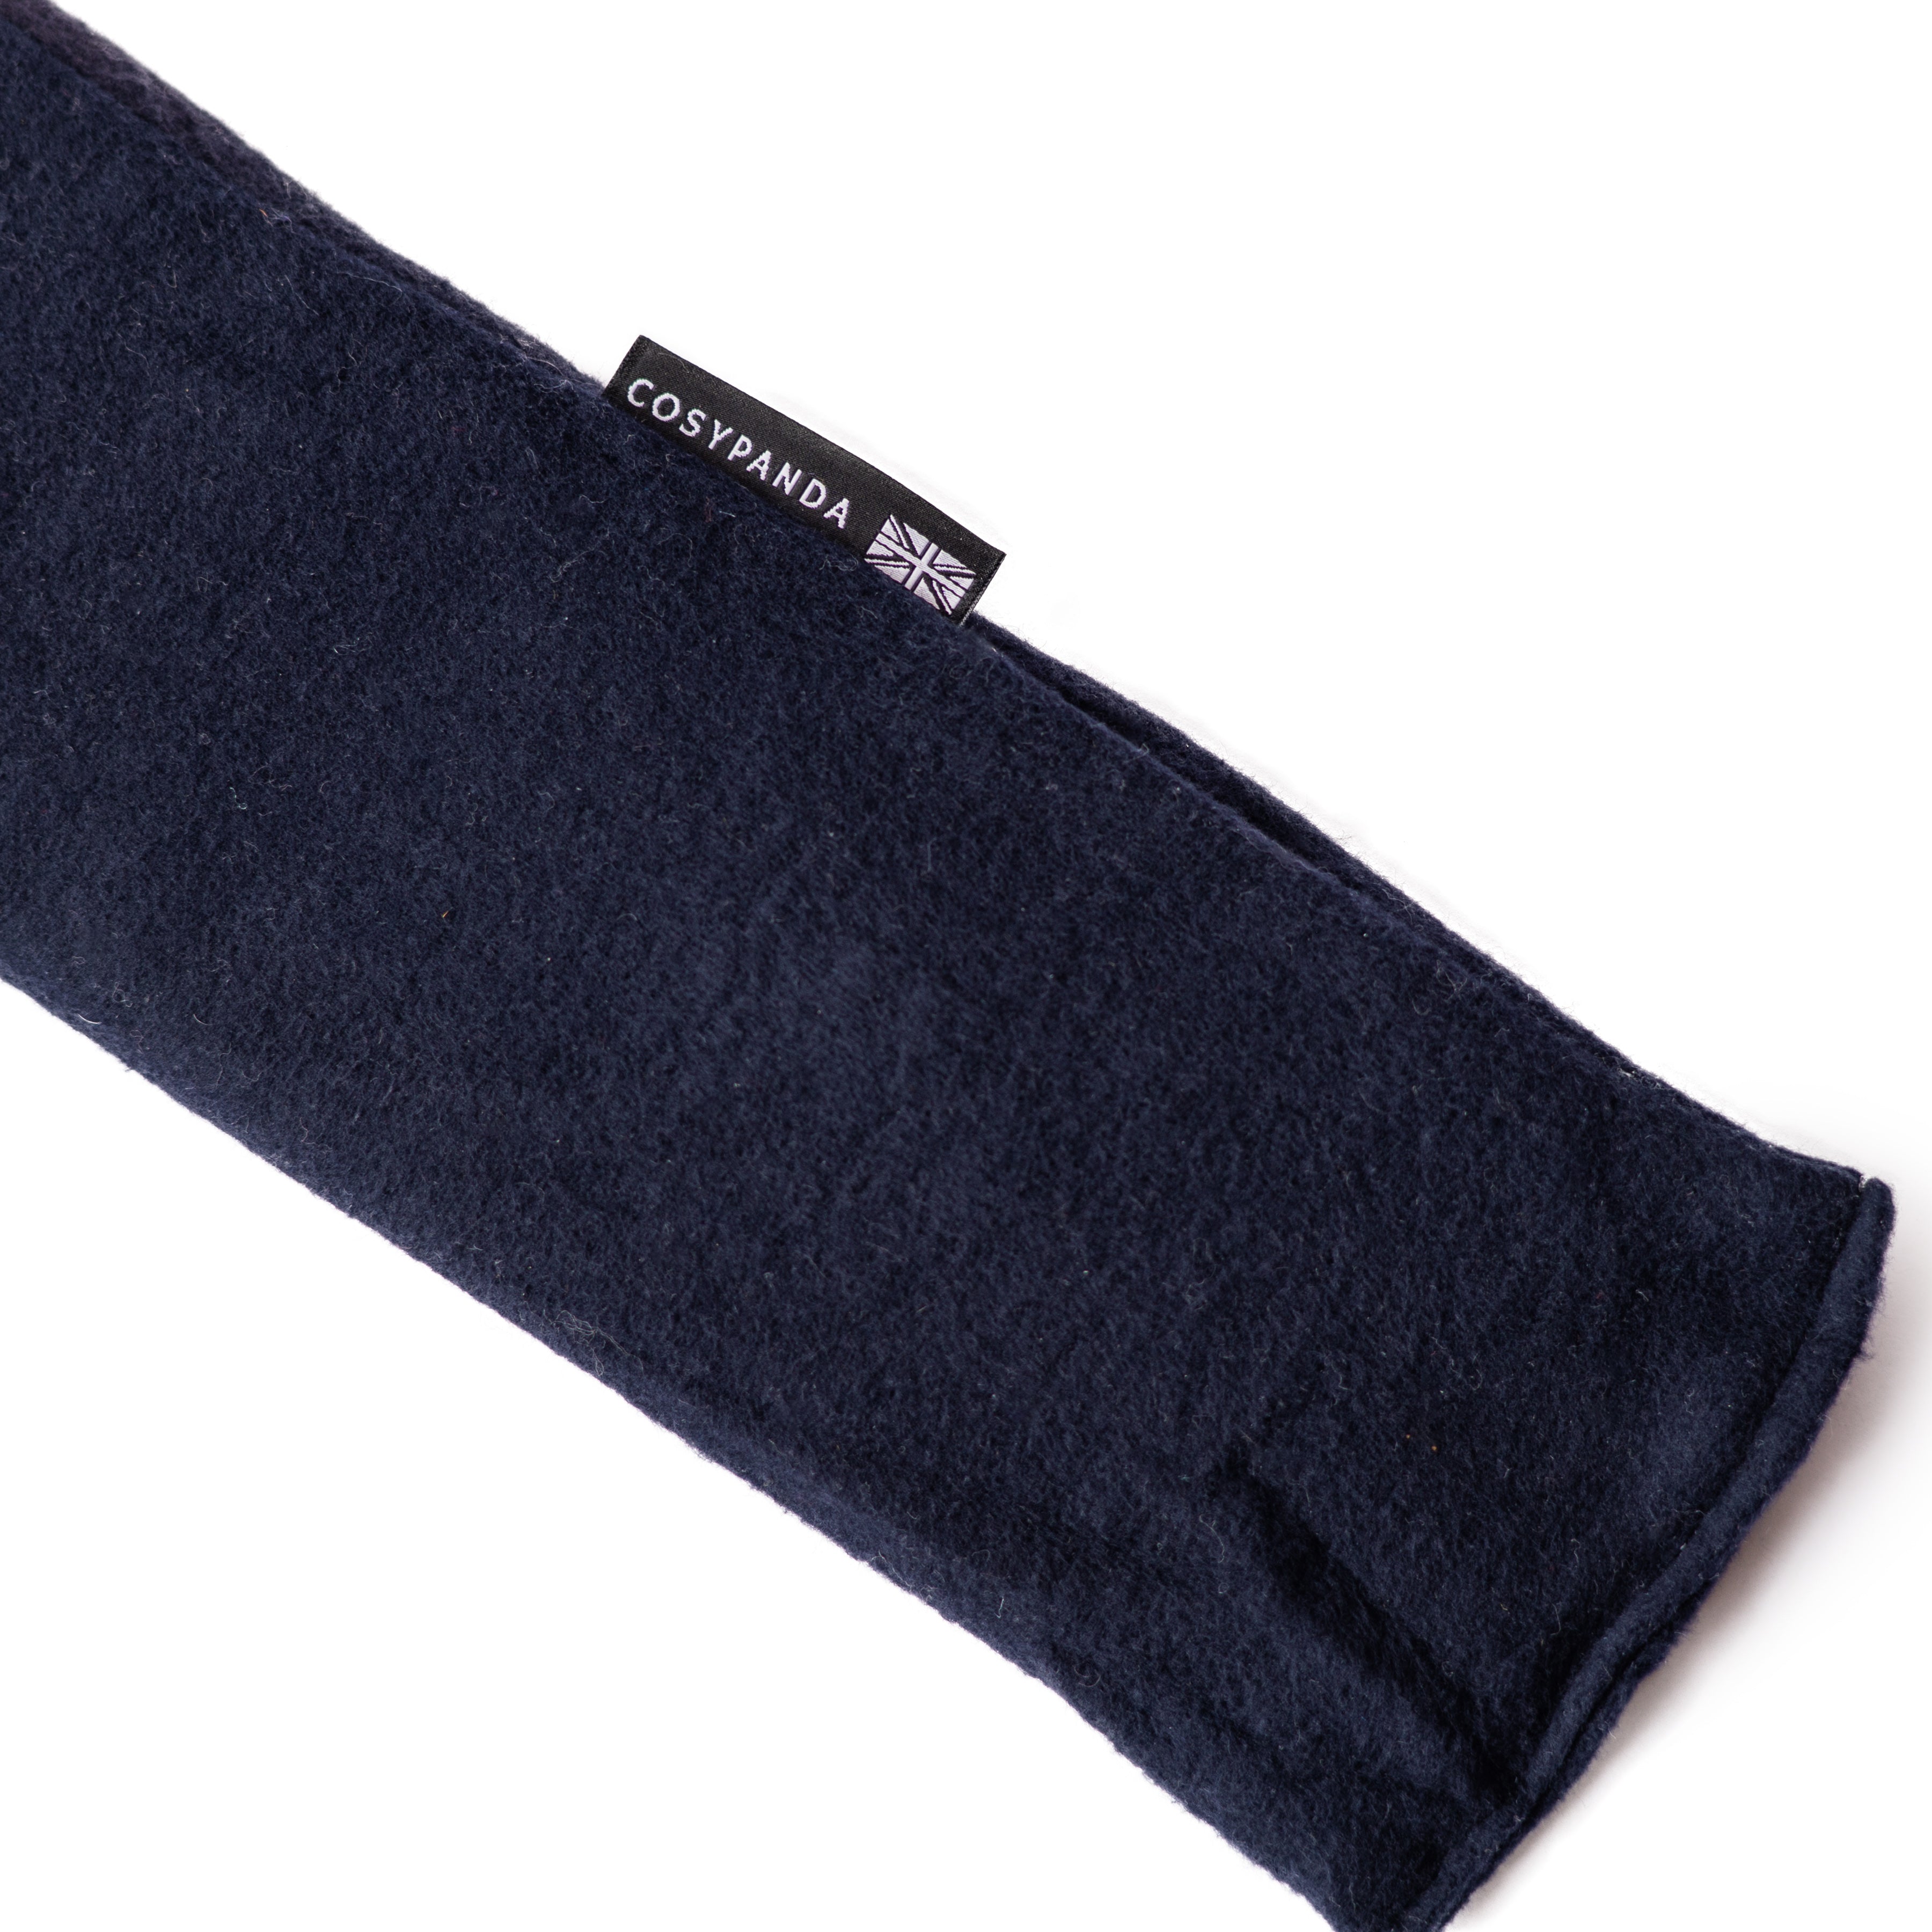 UK Made Natural Cotton Microwaveable Wheat Bag - Navy Blue